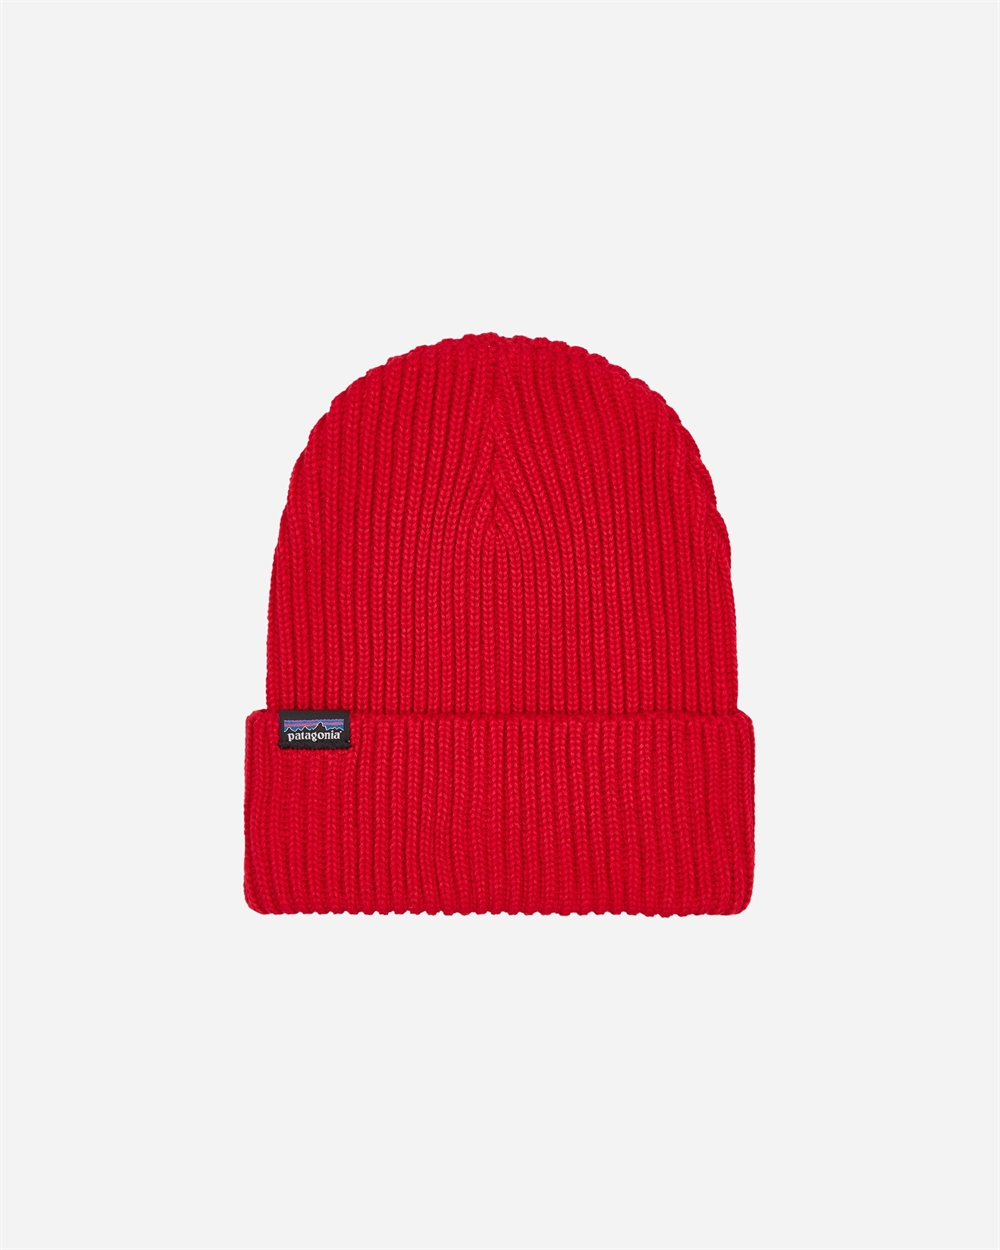 Patagonia Fishermans Rolled Beanie - Touring Red